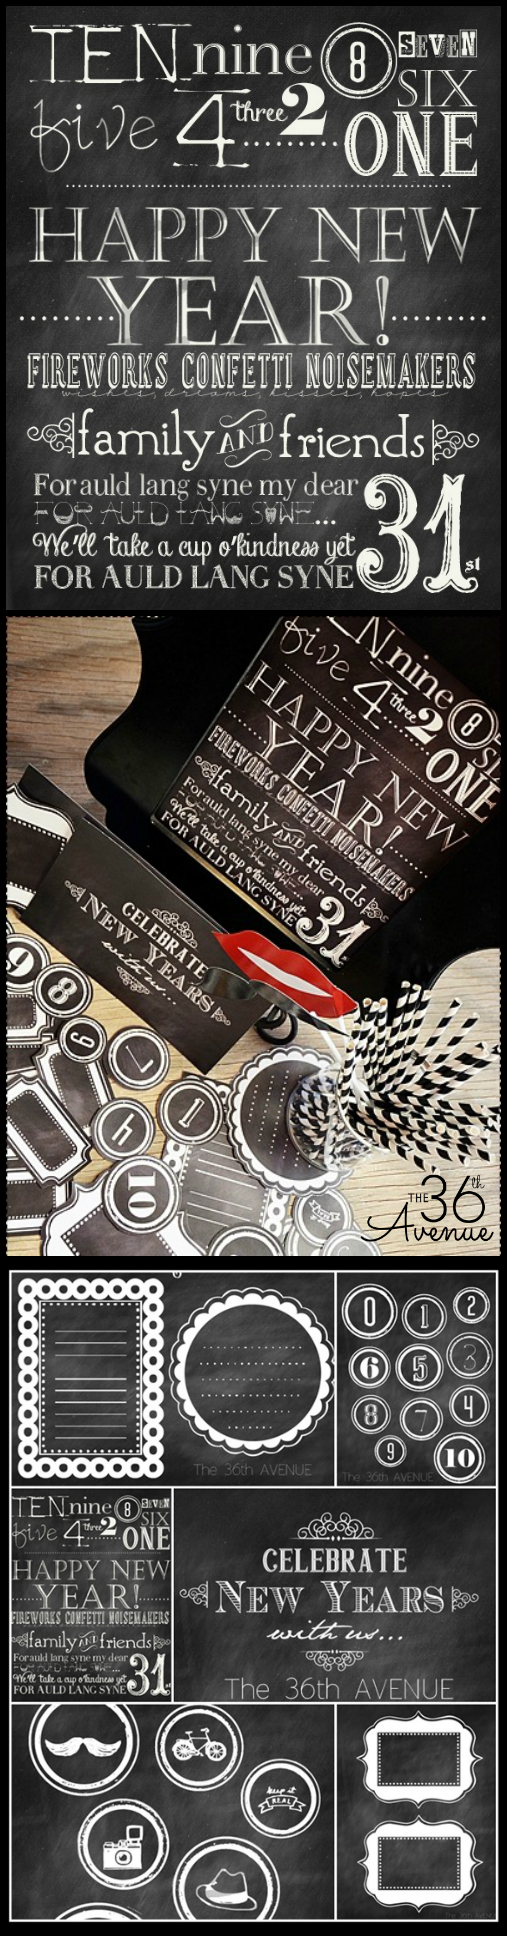 New Years - Get these Free Chalkboard Printables at the36thavenue.com. Everything you need to get your New Years Party ready.